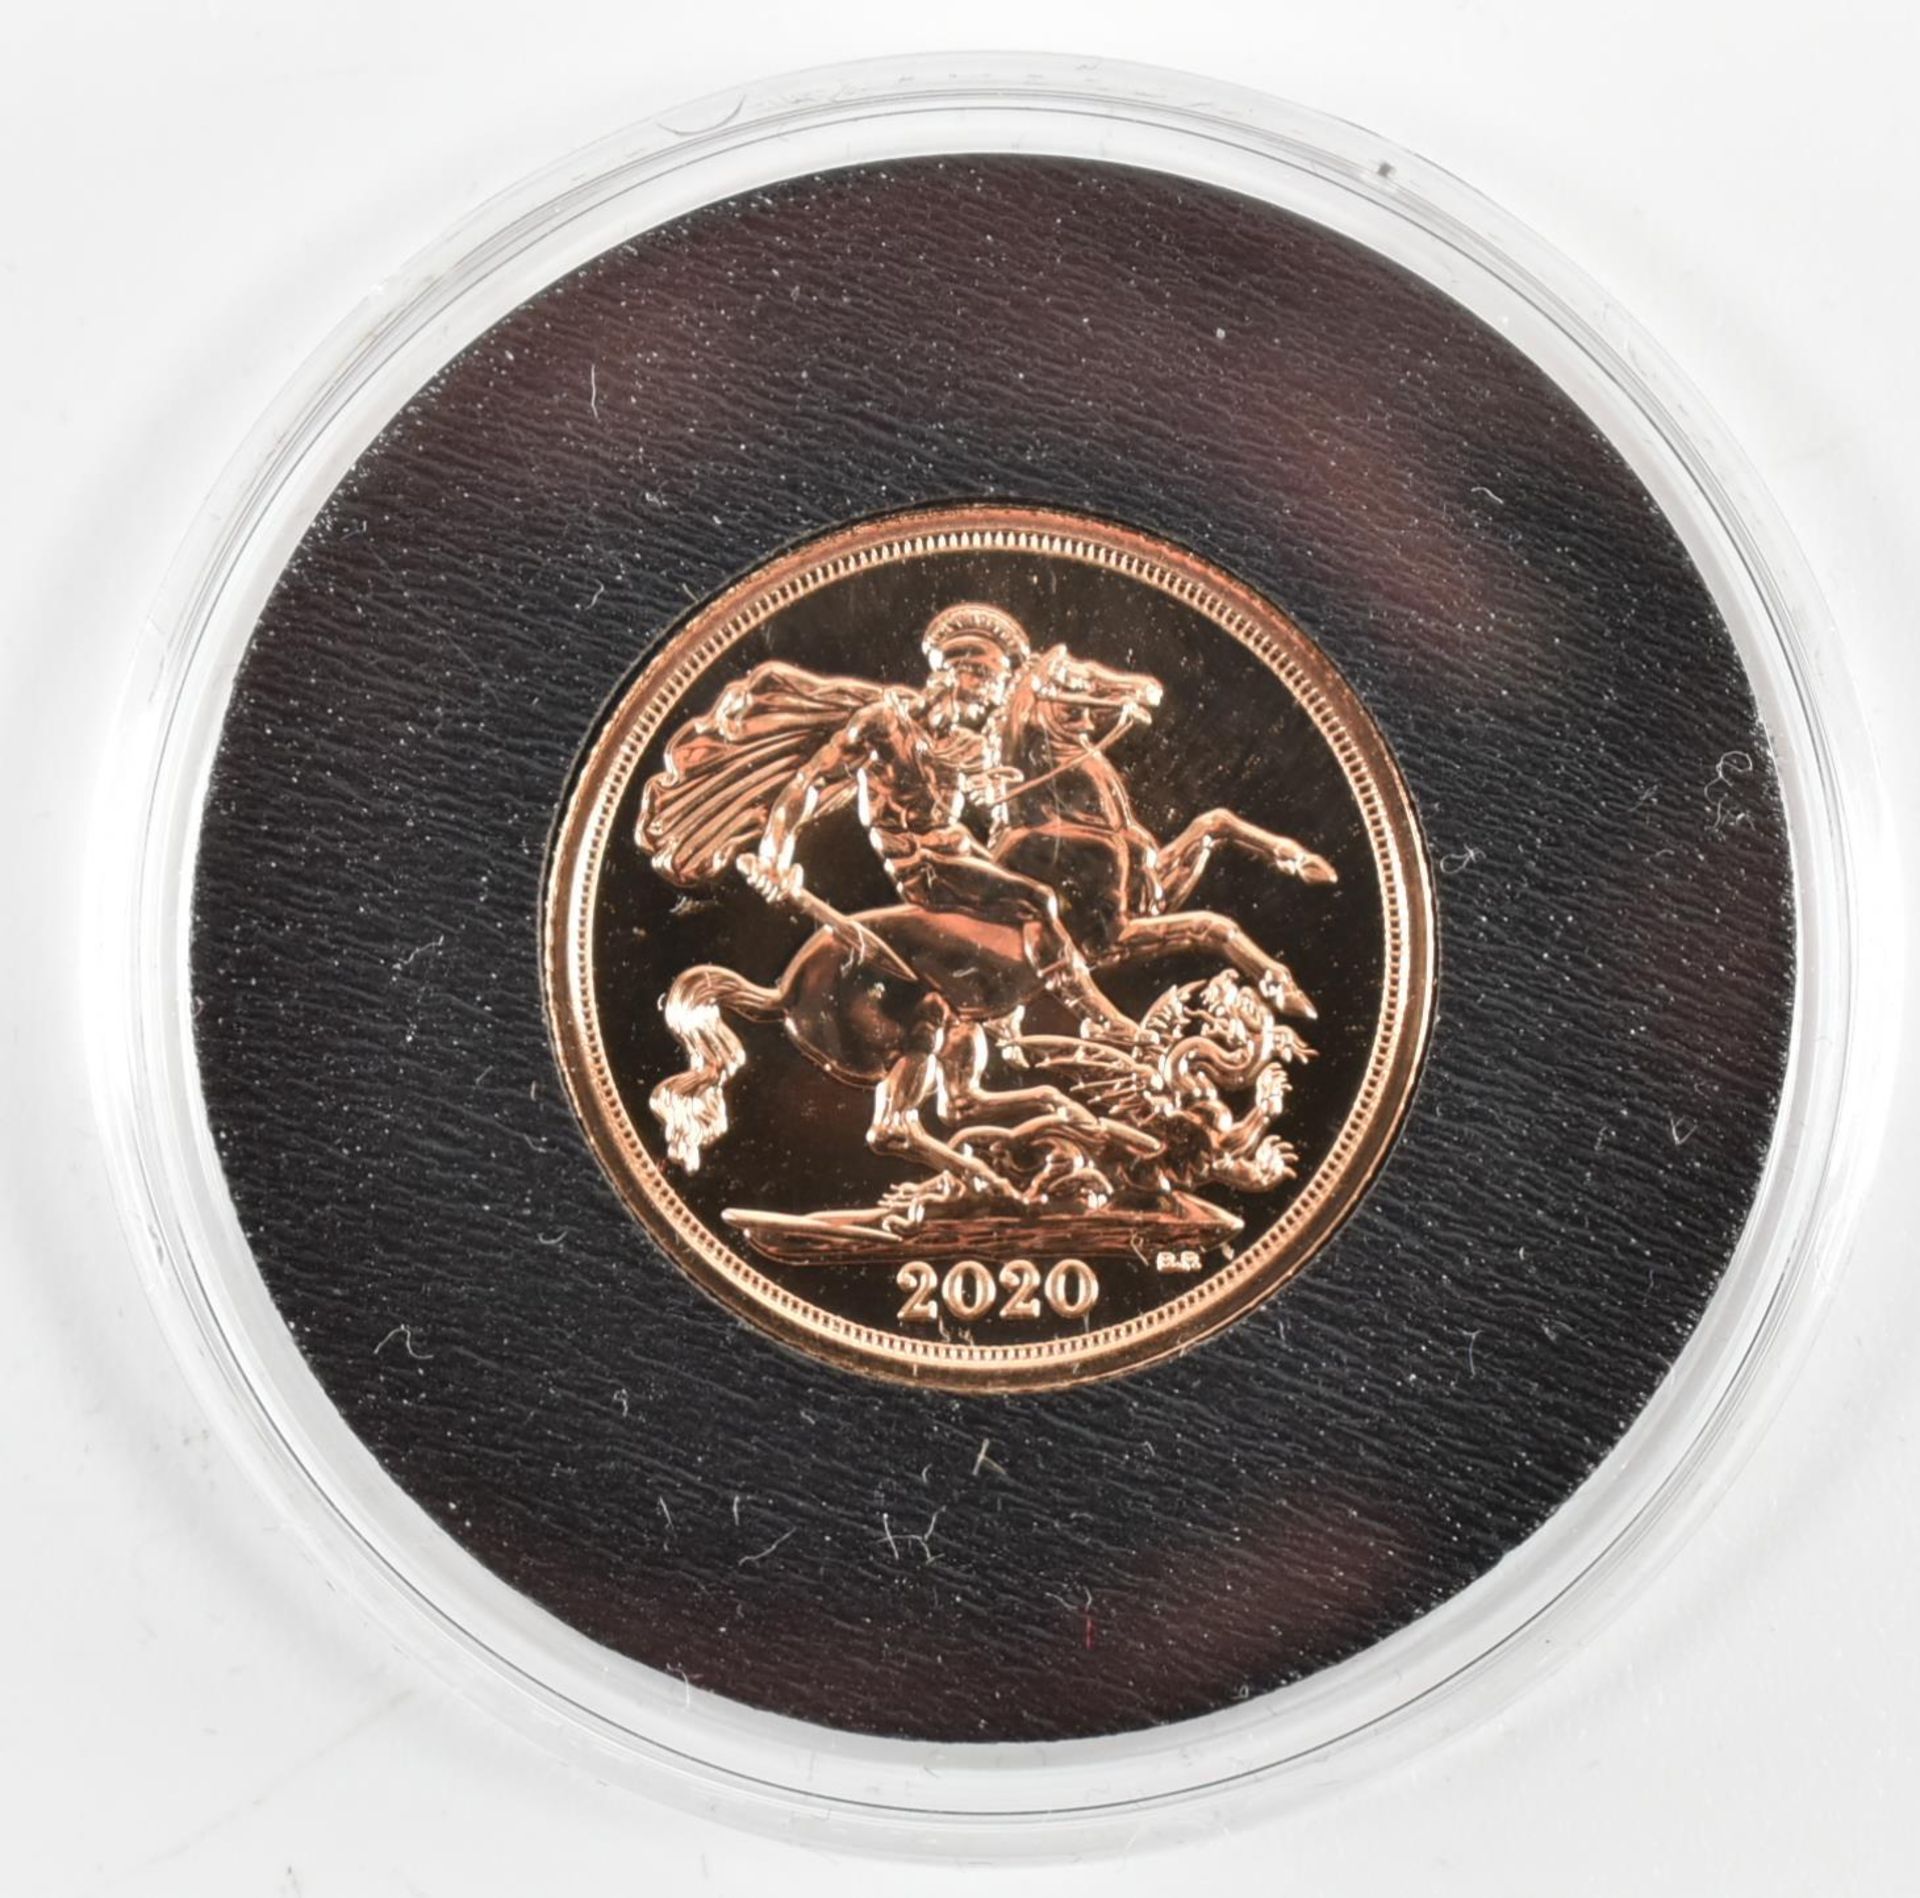 ELIZABETH II 2020 22CT GOLD UNCIRCULATED FULL SOVEREIGN - Image 3 of 3